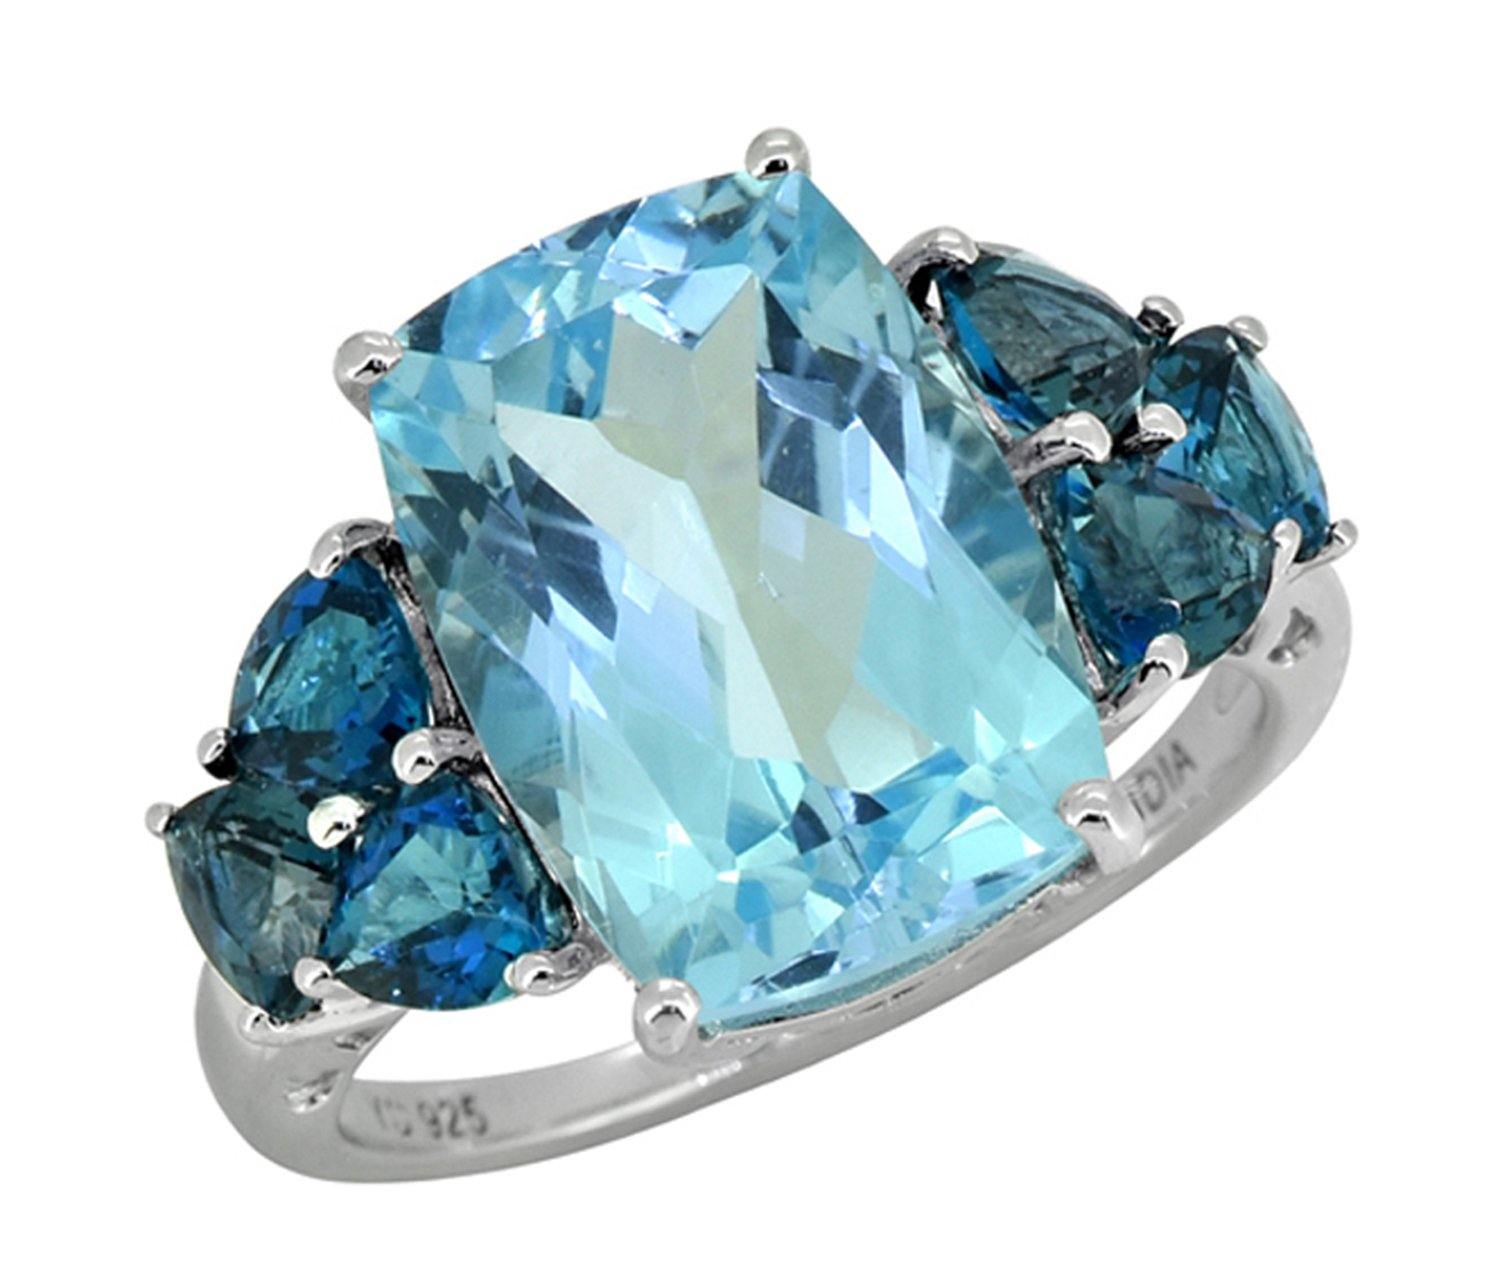 7.30 Ct. Blue Topaz Solid 925 Sterling Silver Ring Jewelry - YoTreasure